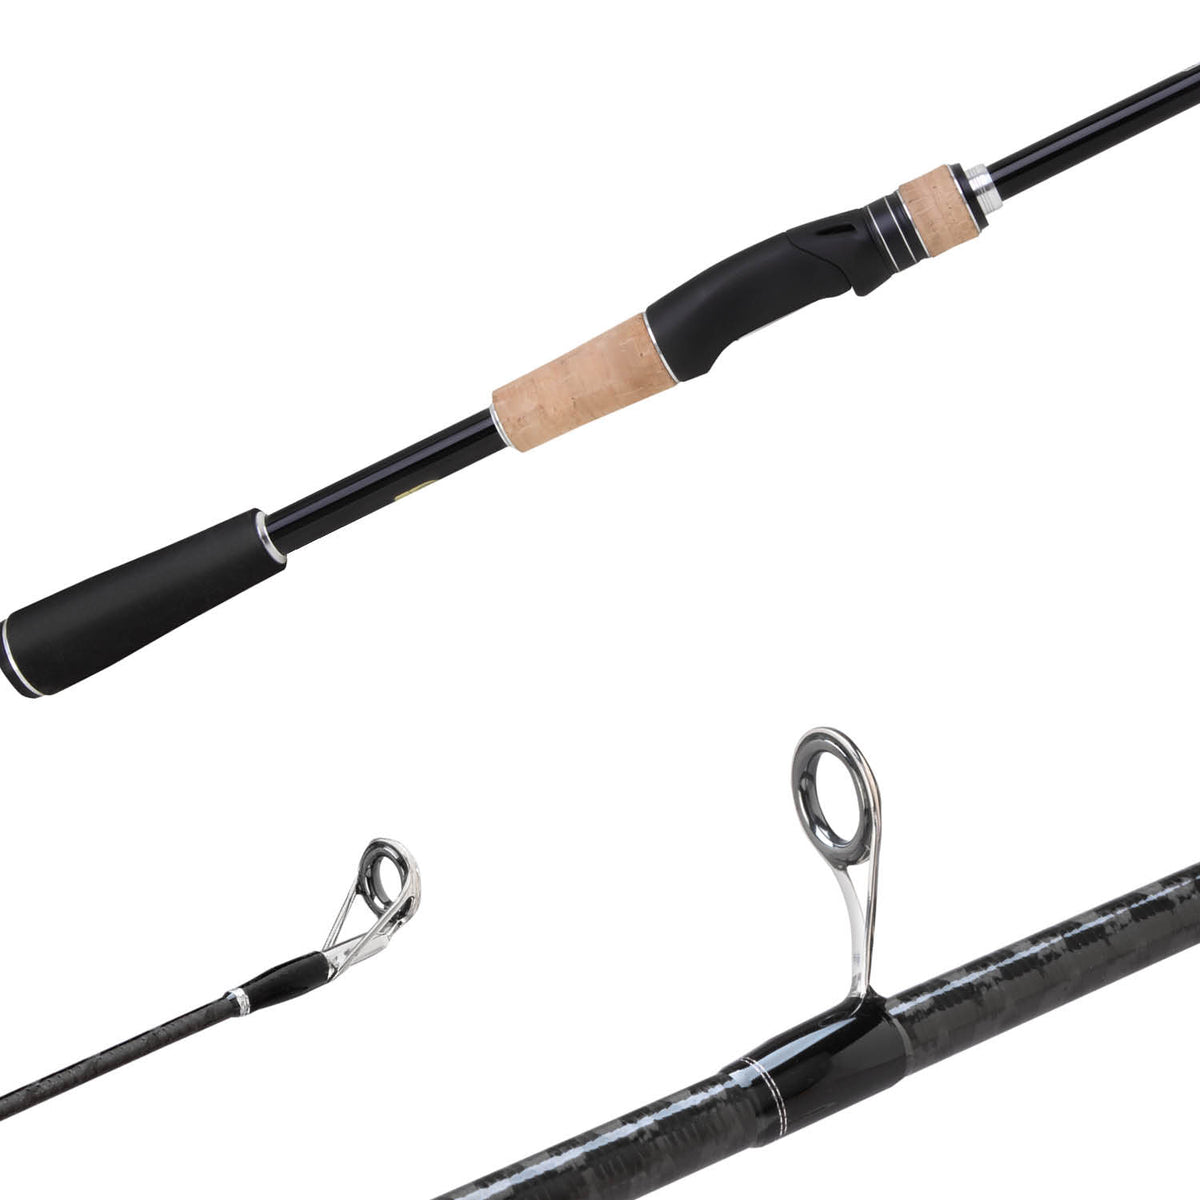 Shimano Expride Spinning Rods